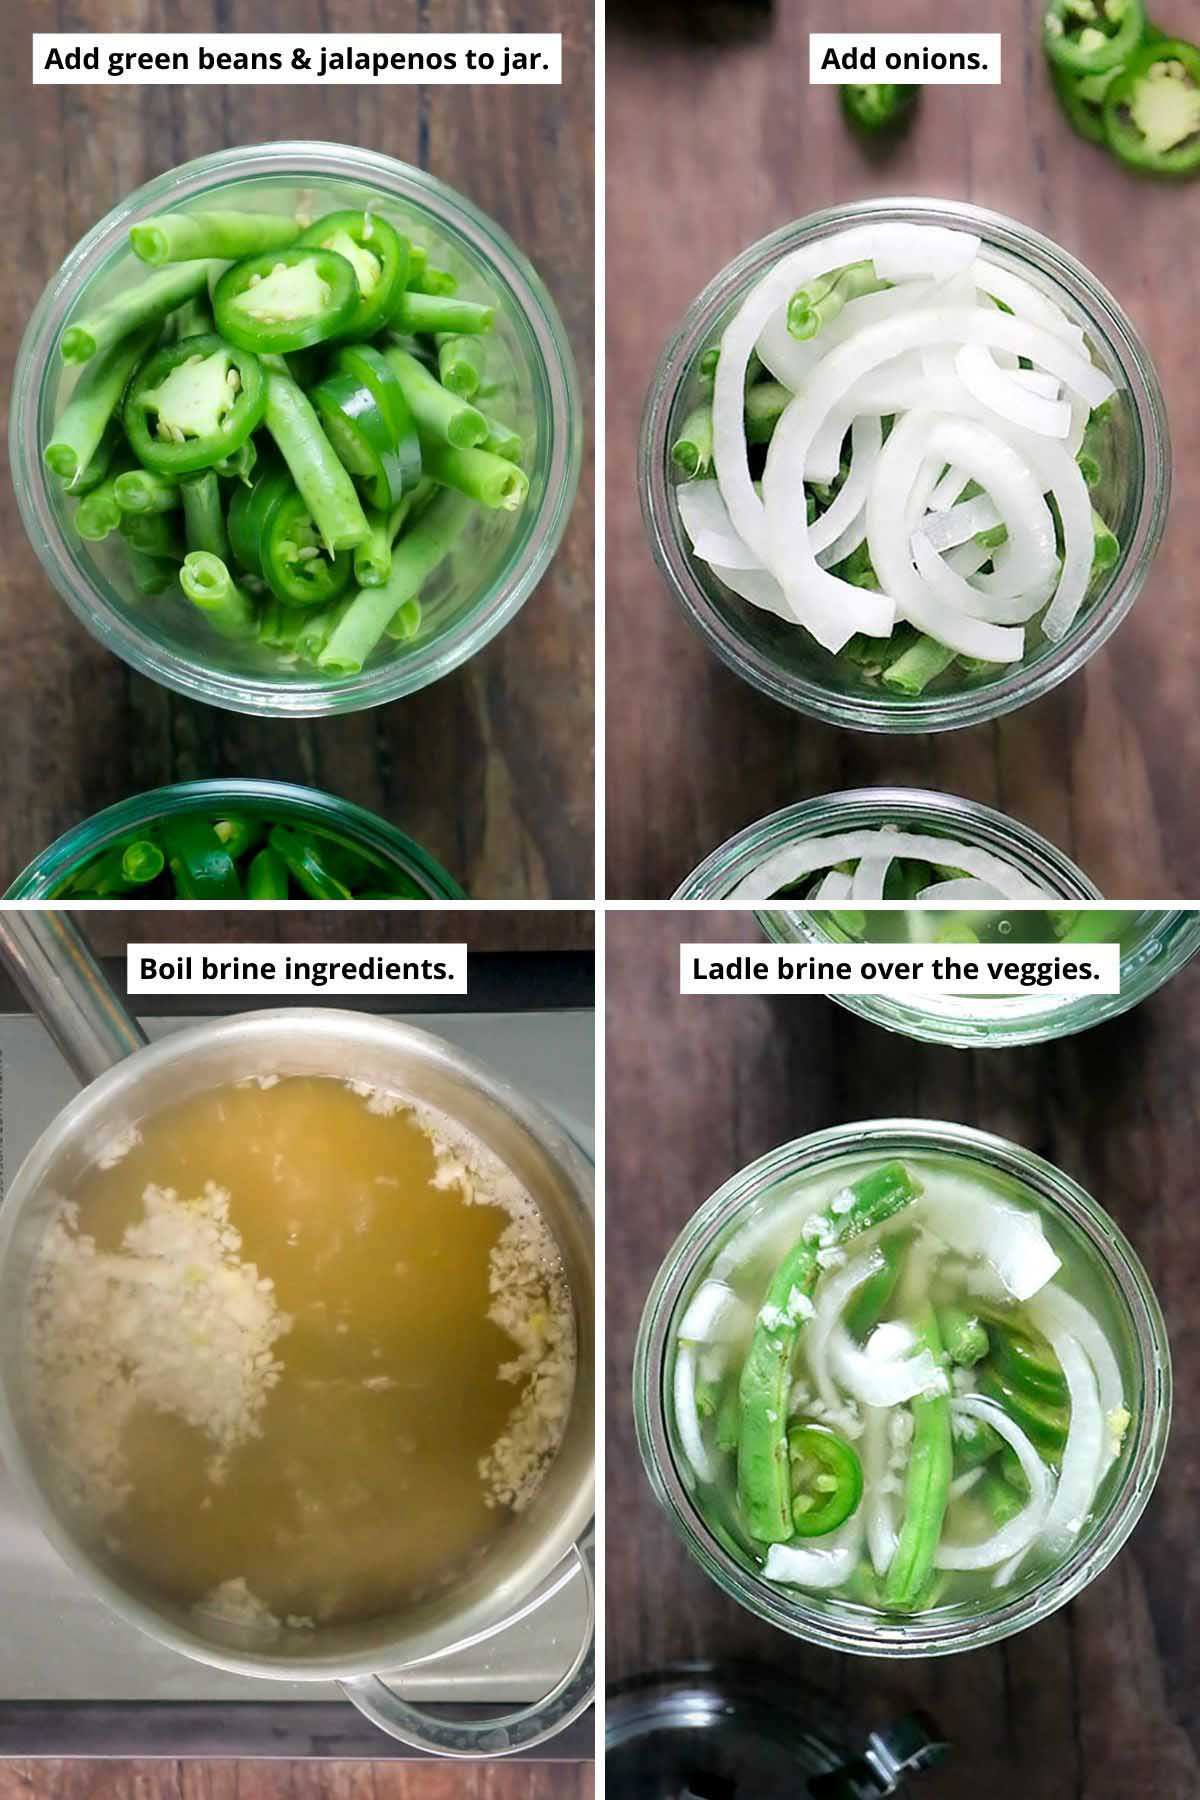 image collage showing the green beans and jalapeños in the jar, adding onions to the jar, the brine in the pan, and the jar of green beans with the brine poured over them